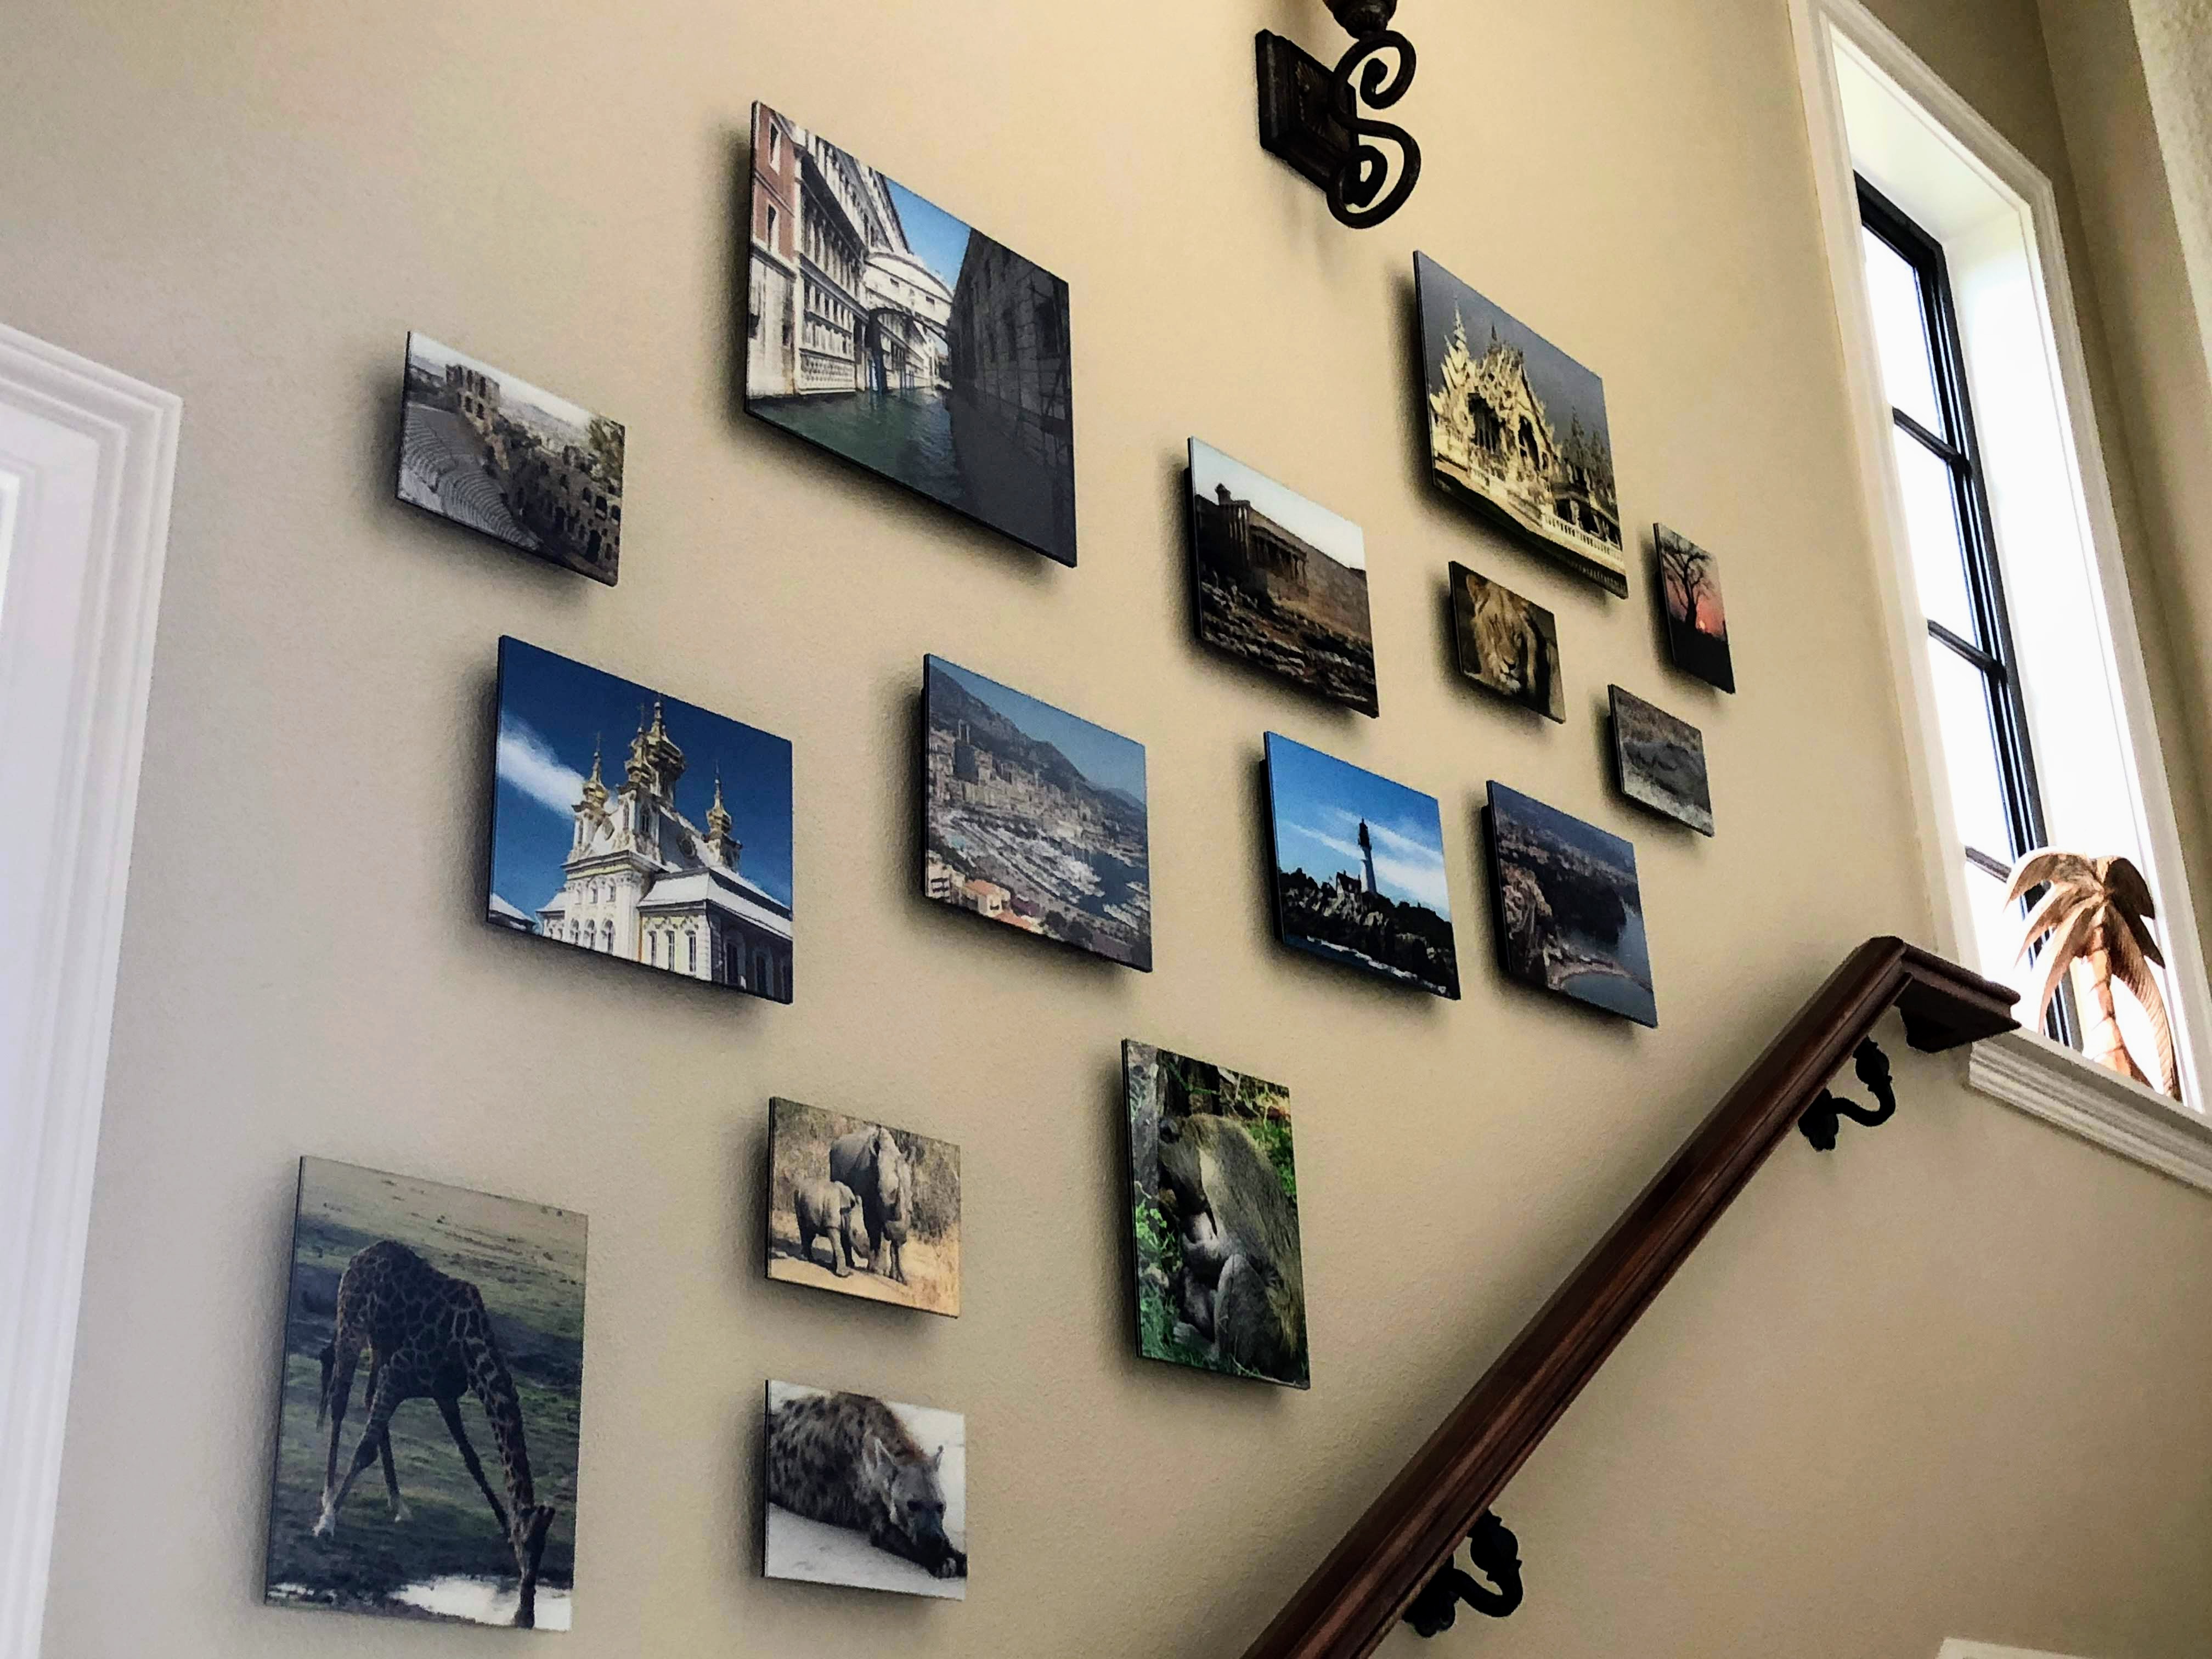 acrylic prints made for travel wall at Artmill.com